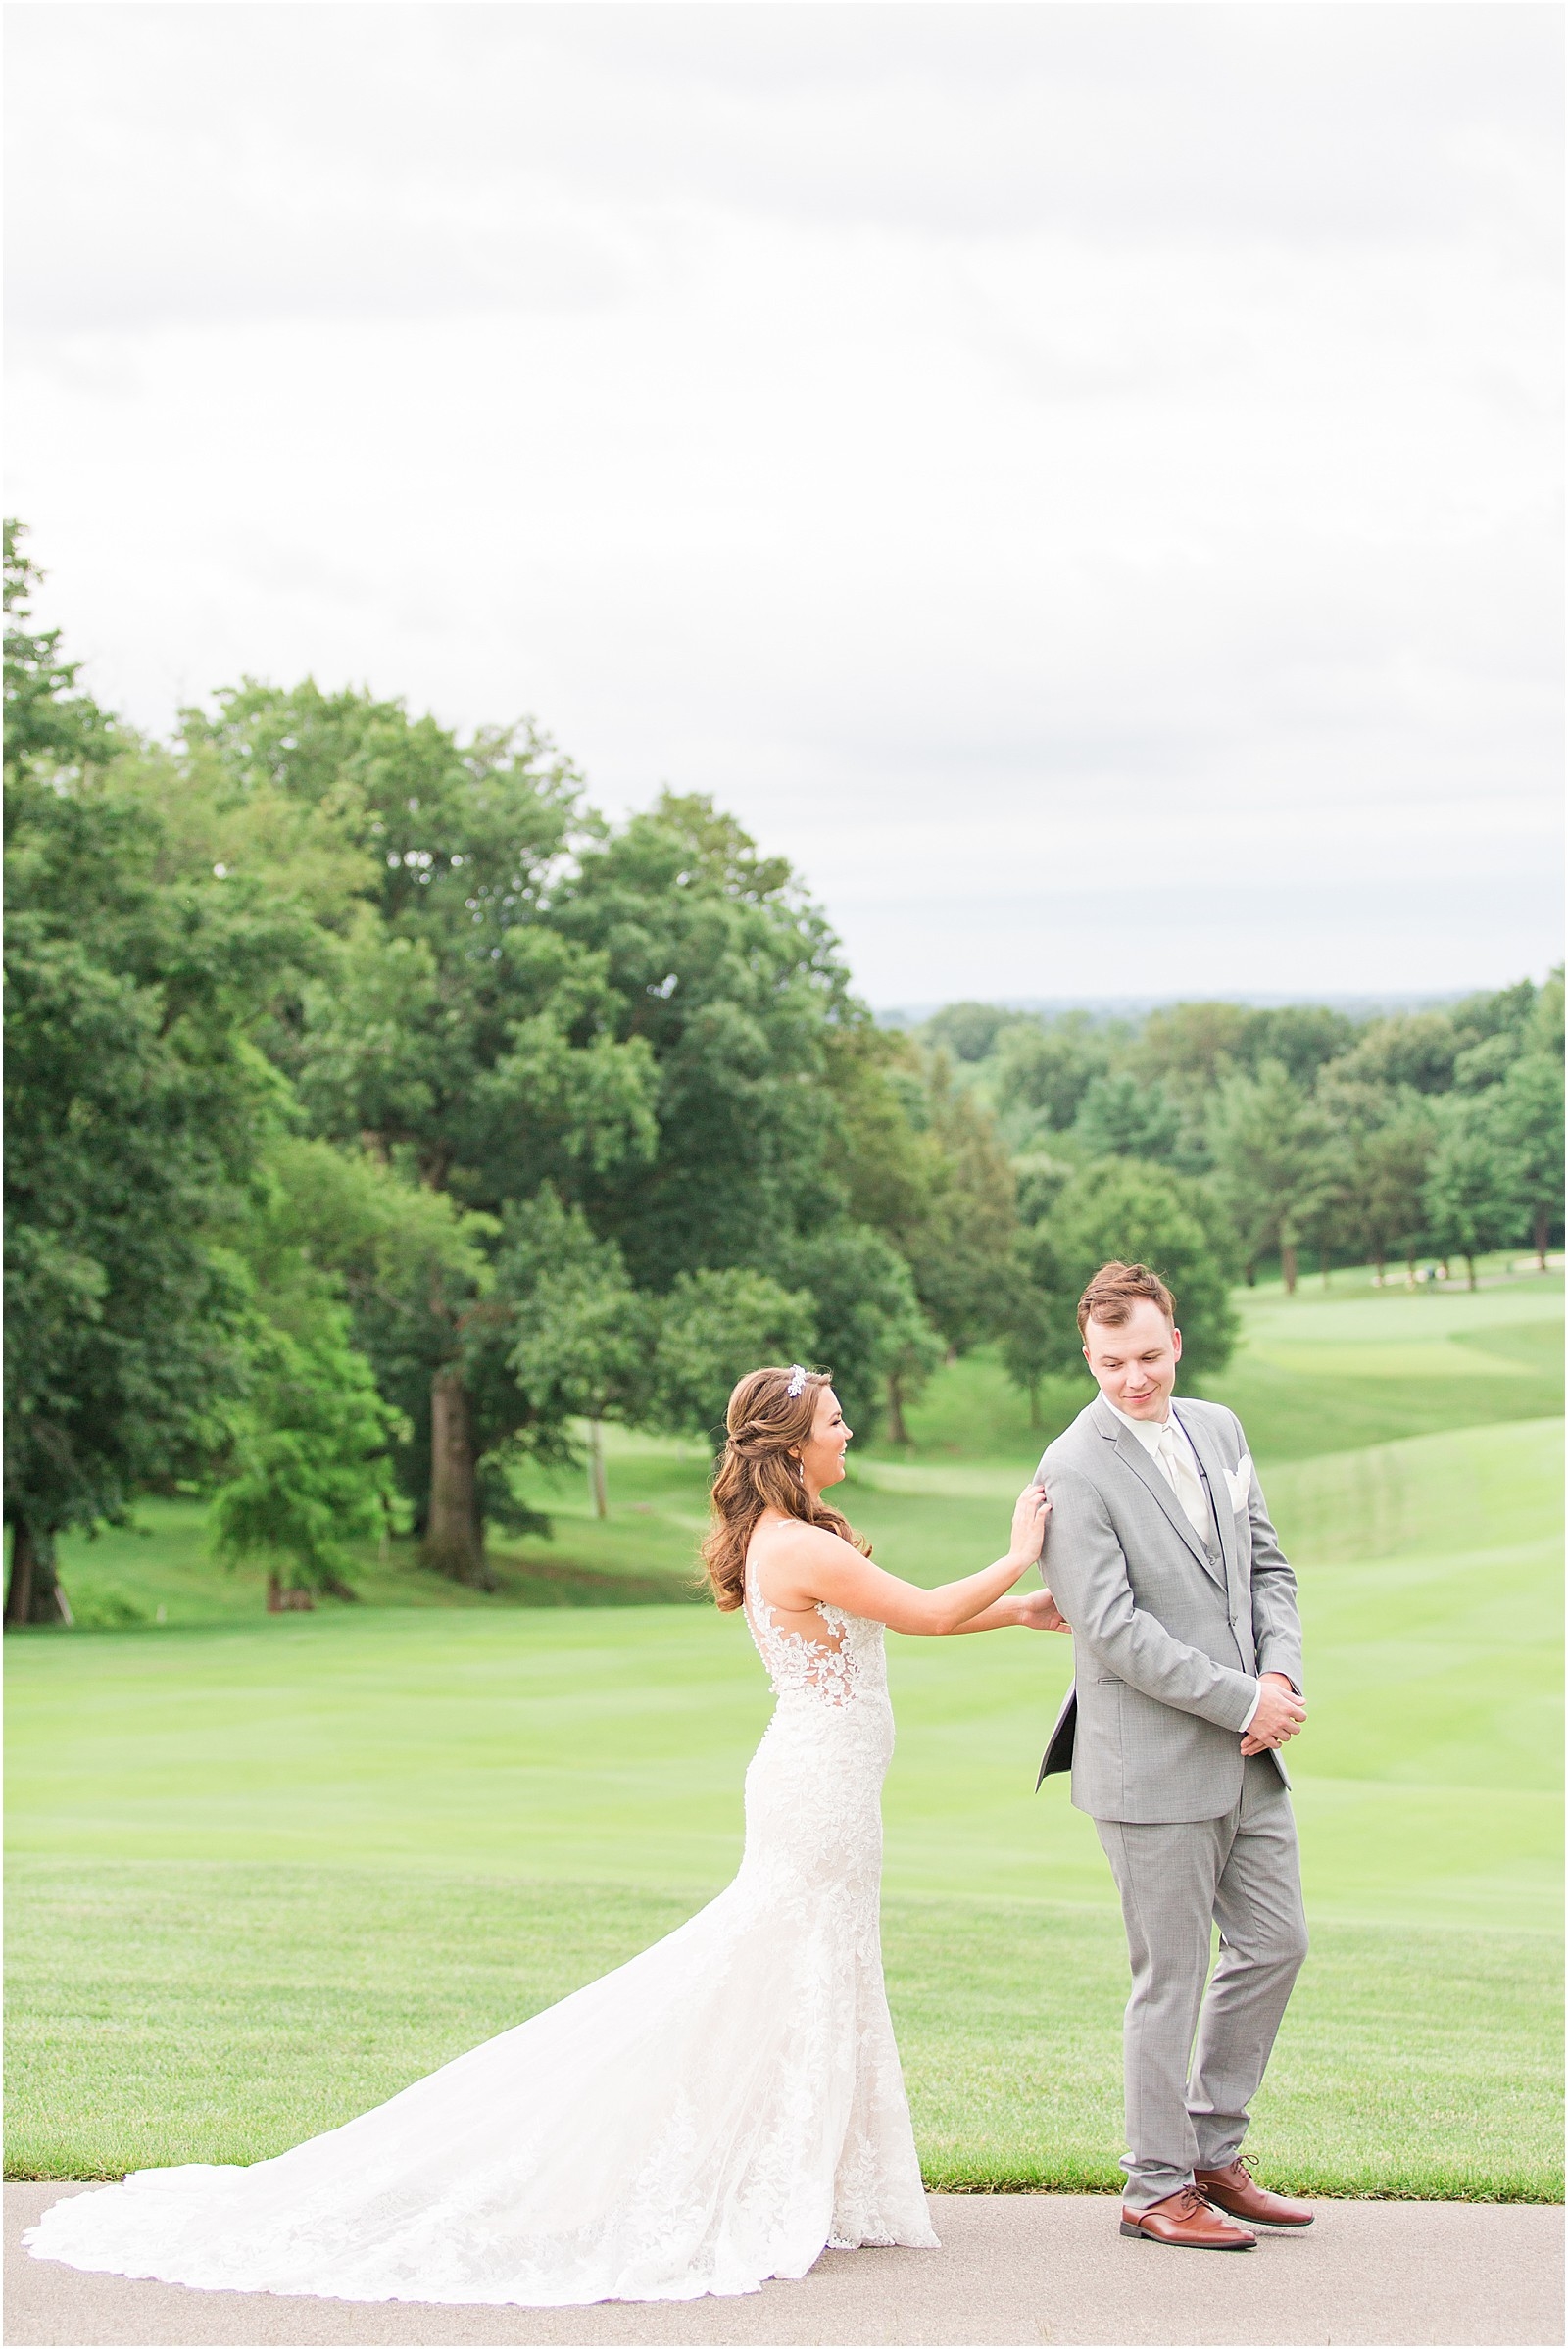 An Evansville County Club Wedding | Abby and Stratton 046.jpg